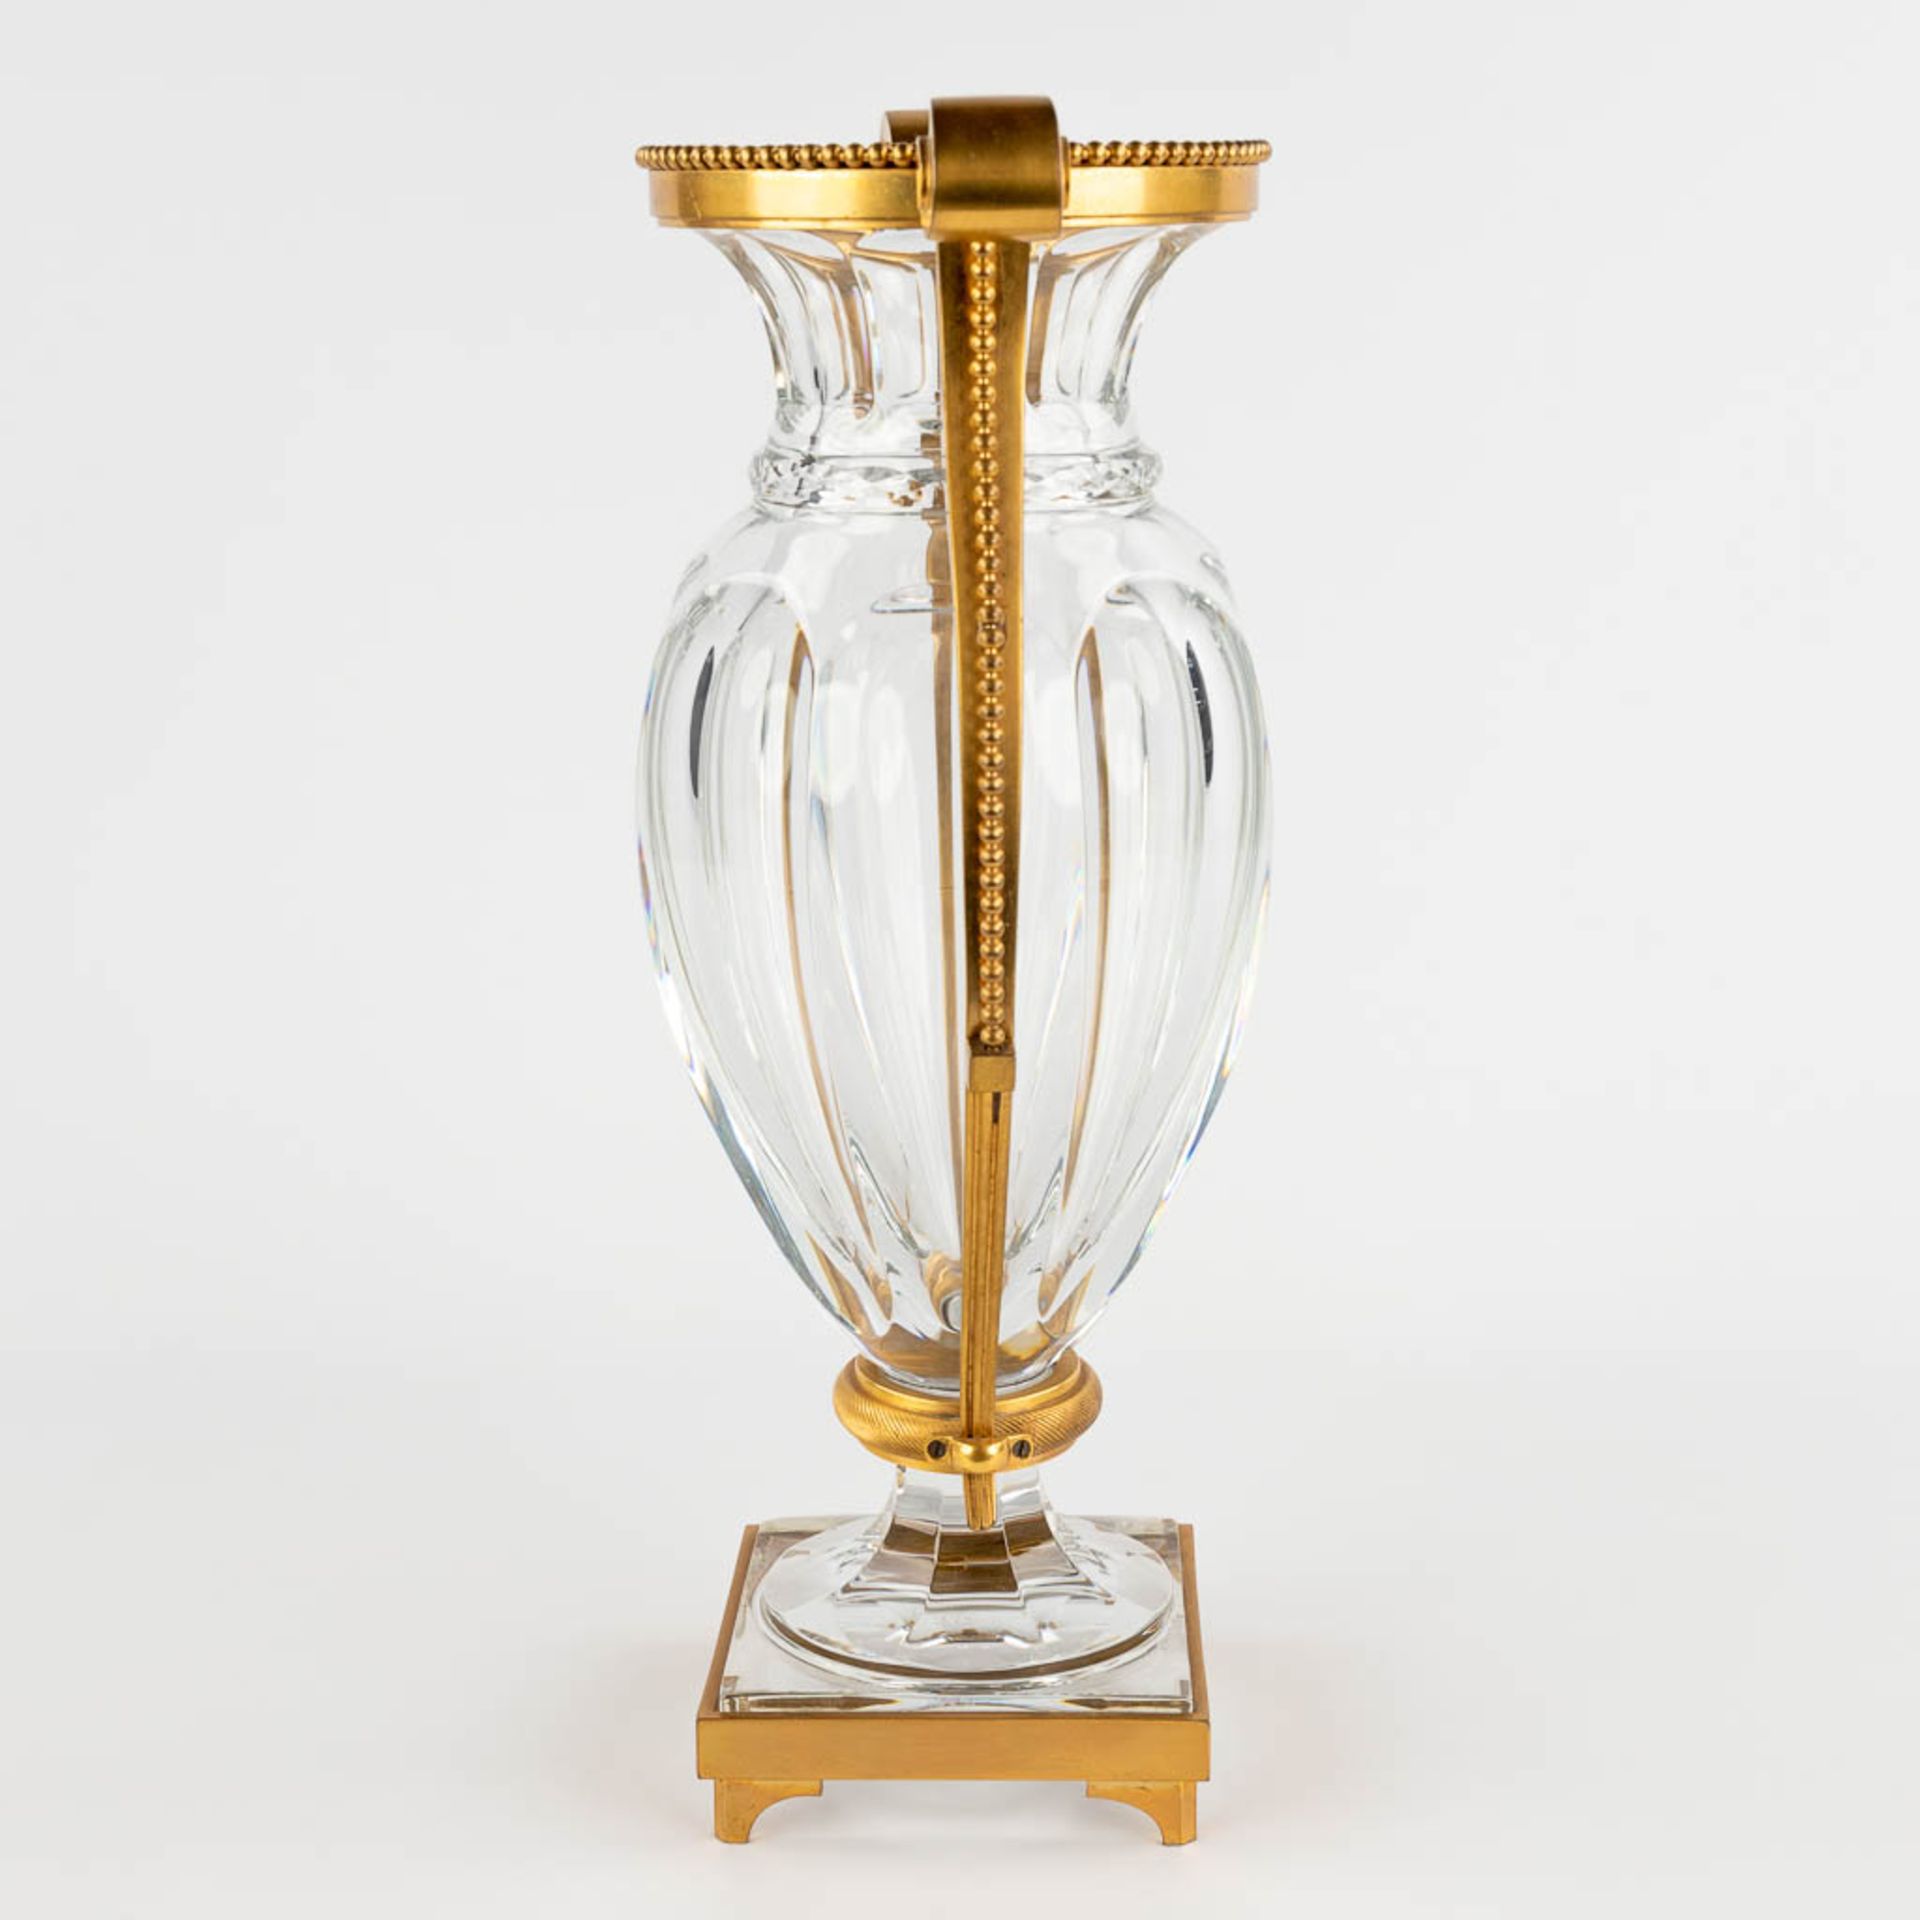 Baccarat, a large crystal vase mounted with gilt bronze. 20th C. (D:14 x W:22 x H:38,5 cm) - Image 6 of 12